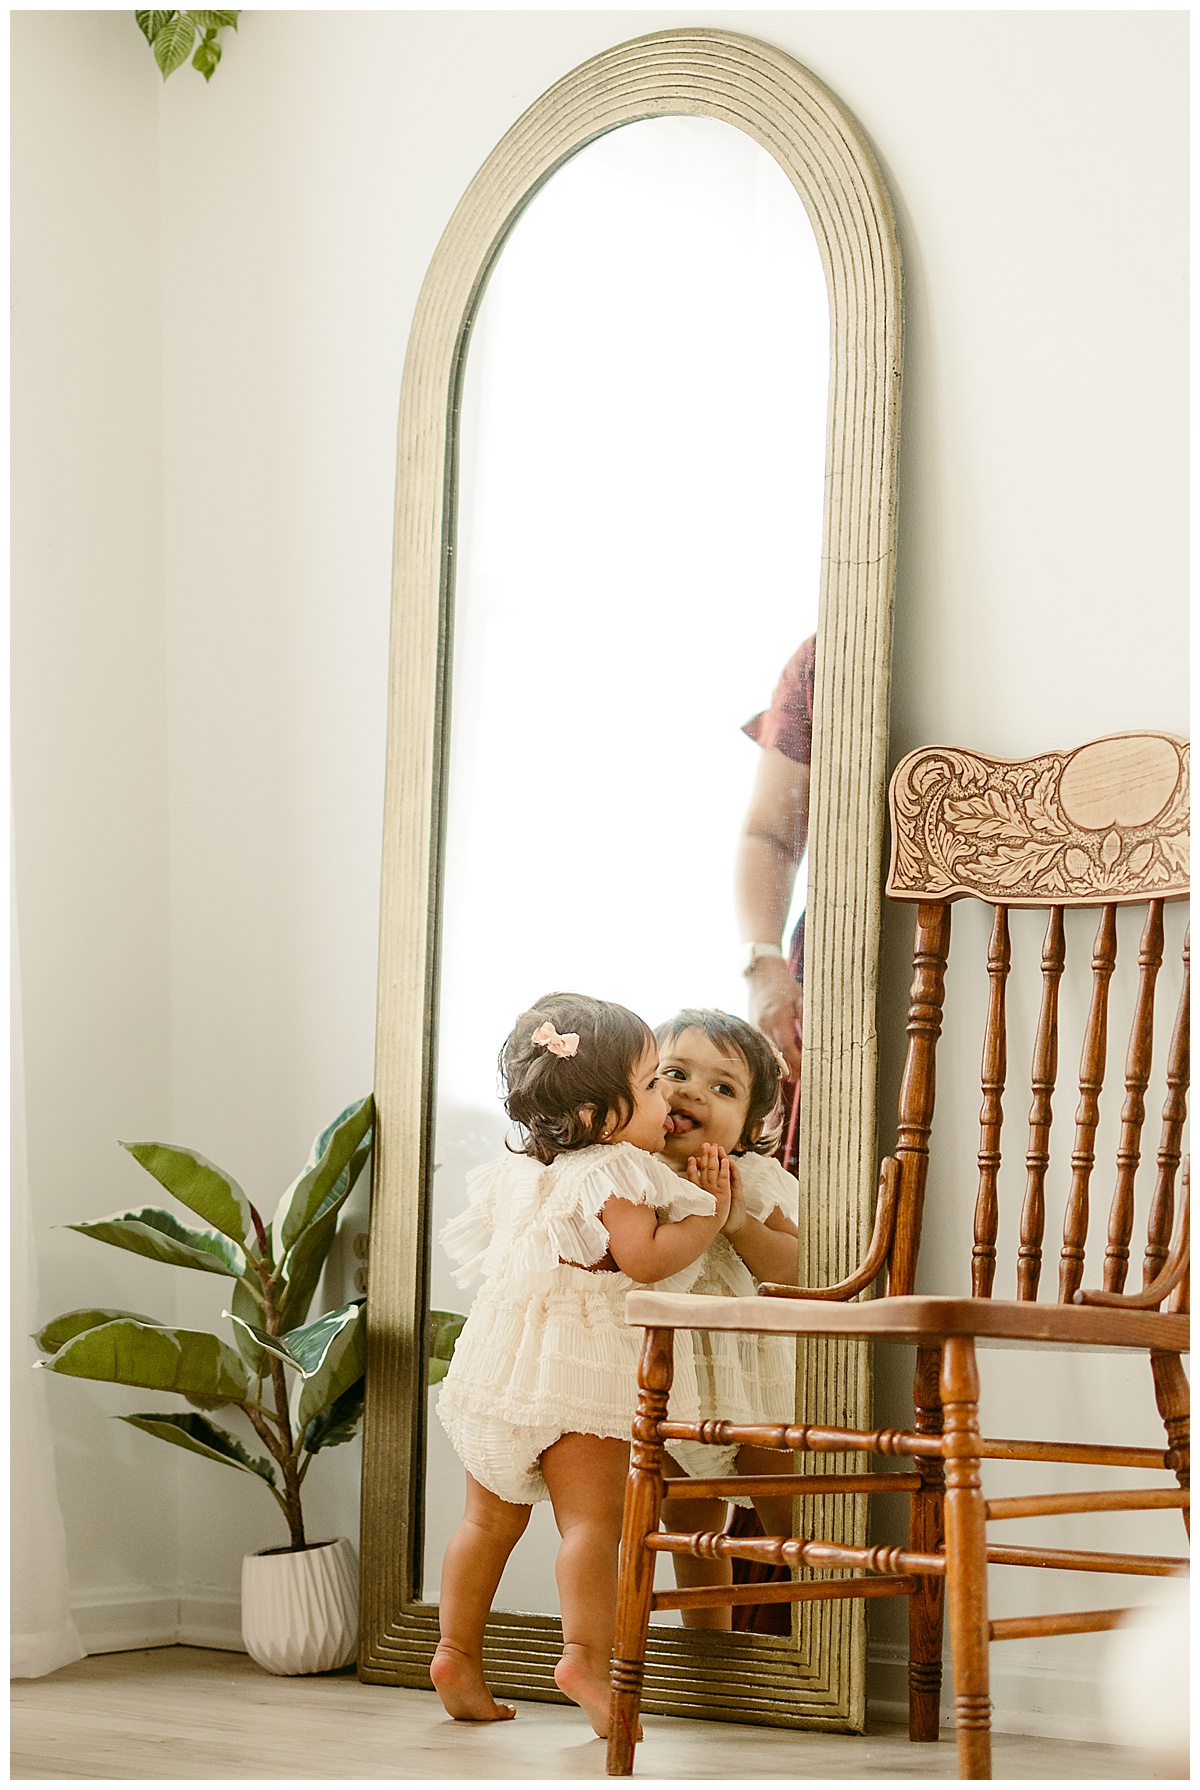 Young girl plays in front of the mirror during their Unposed Lifestyle Shoot